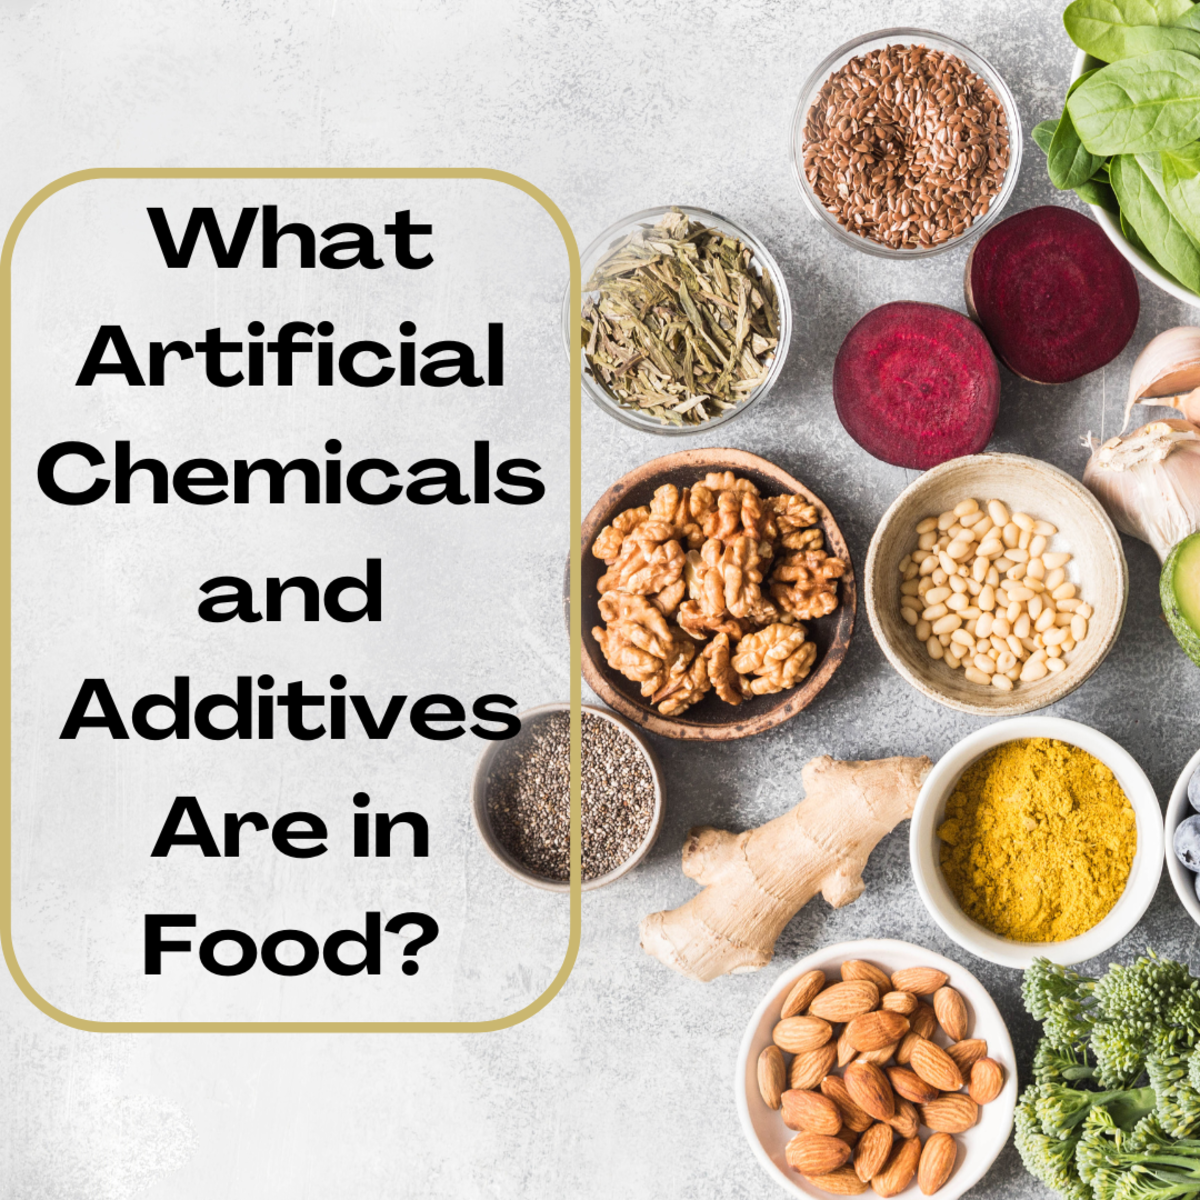 Artificial Chemicals and Additives in Food